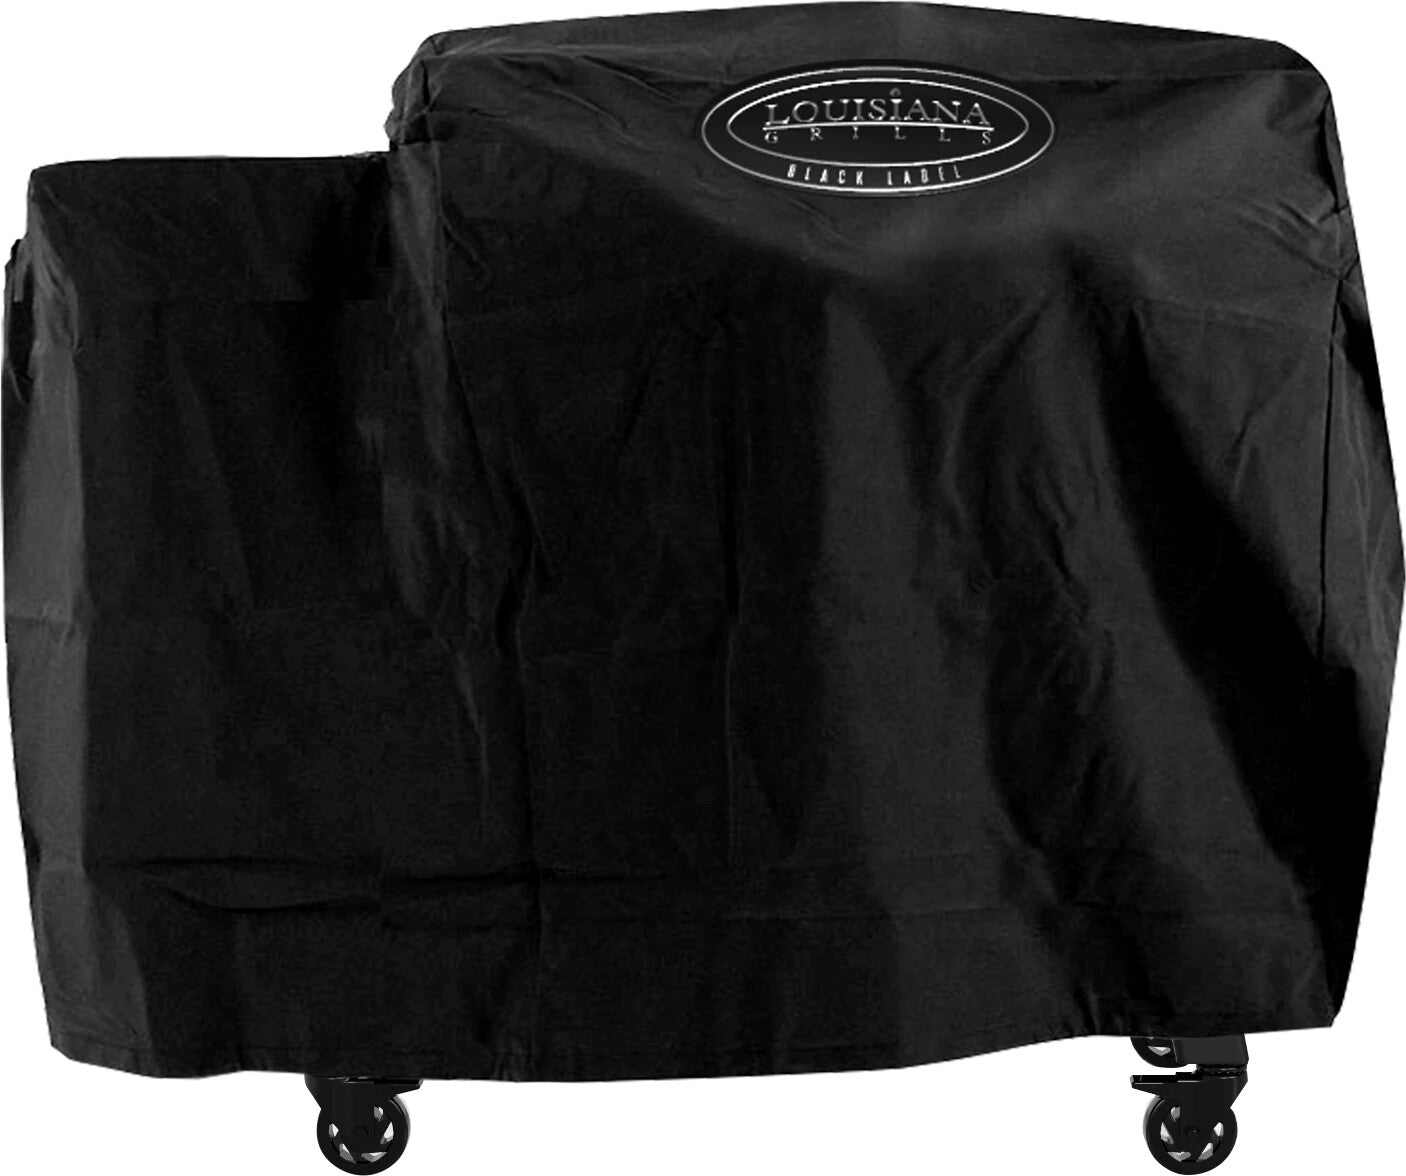 Louisiana Grills Cover for Black Label Series (LG1200BL)